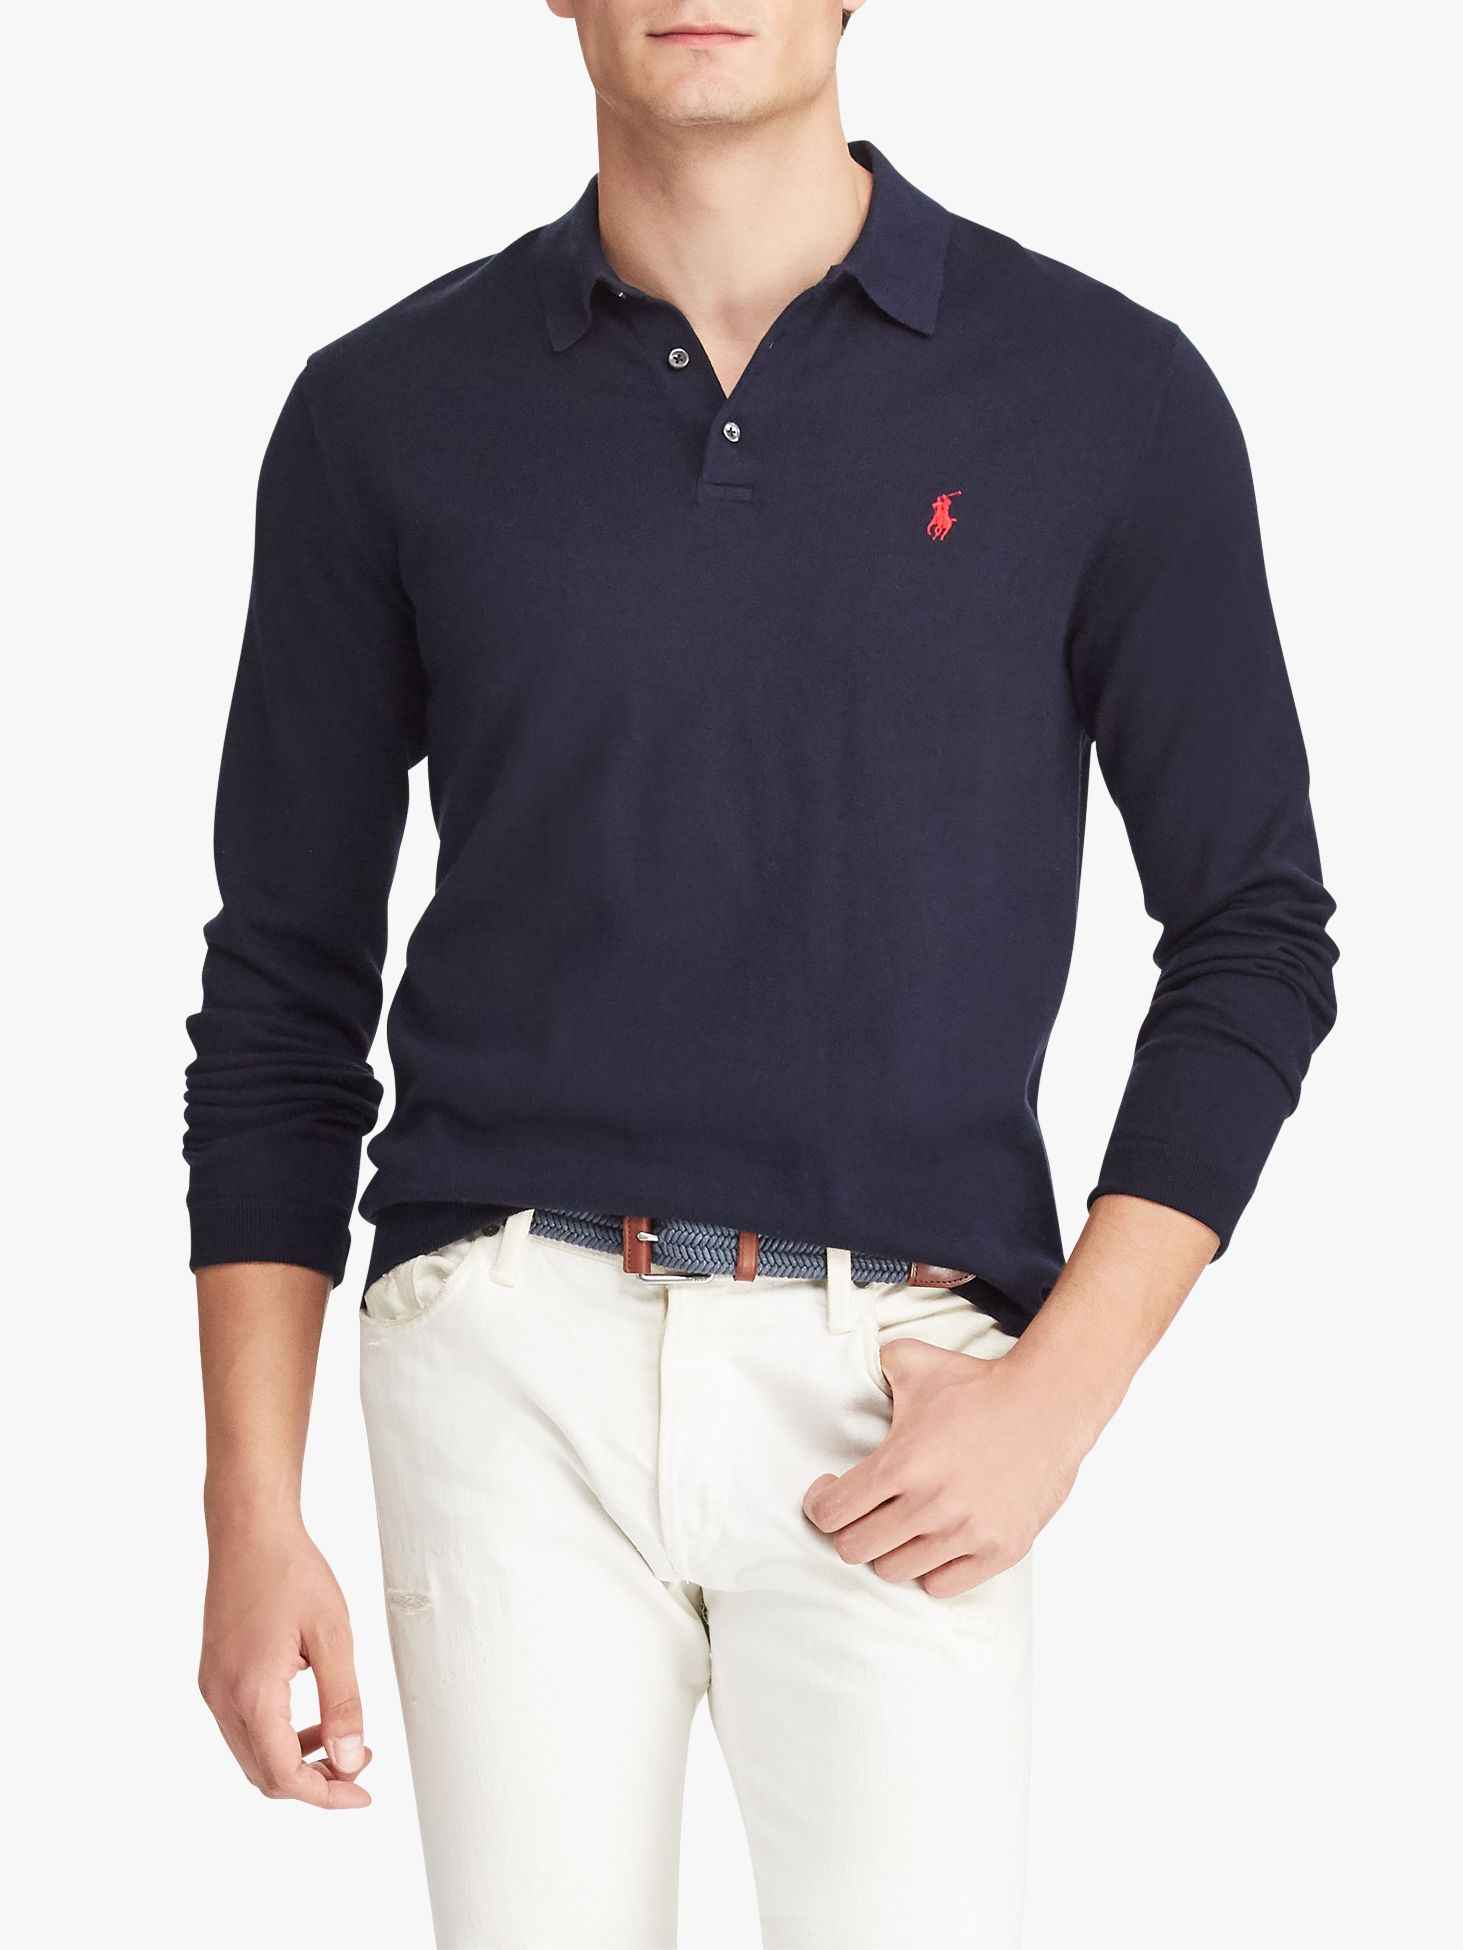 Men's Knitted Polo Long Sleeve Reiss Polo Textured Knitted Sleeve Shirt ...